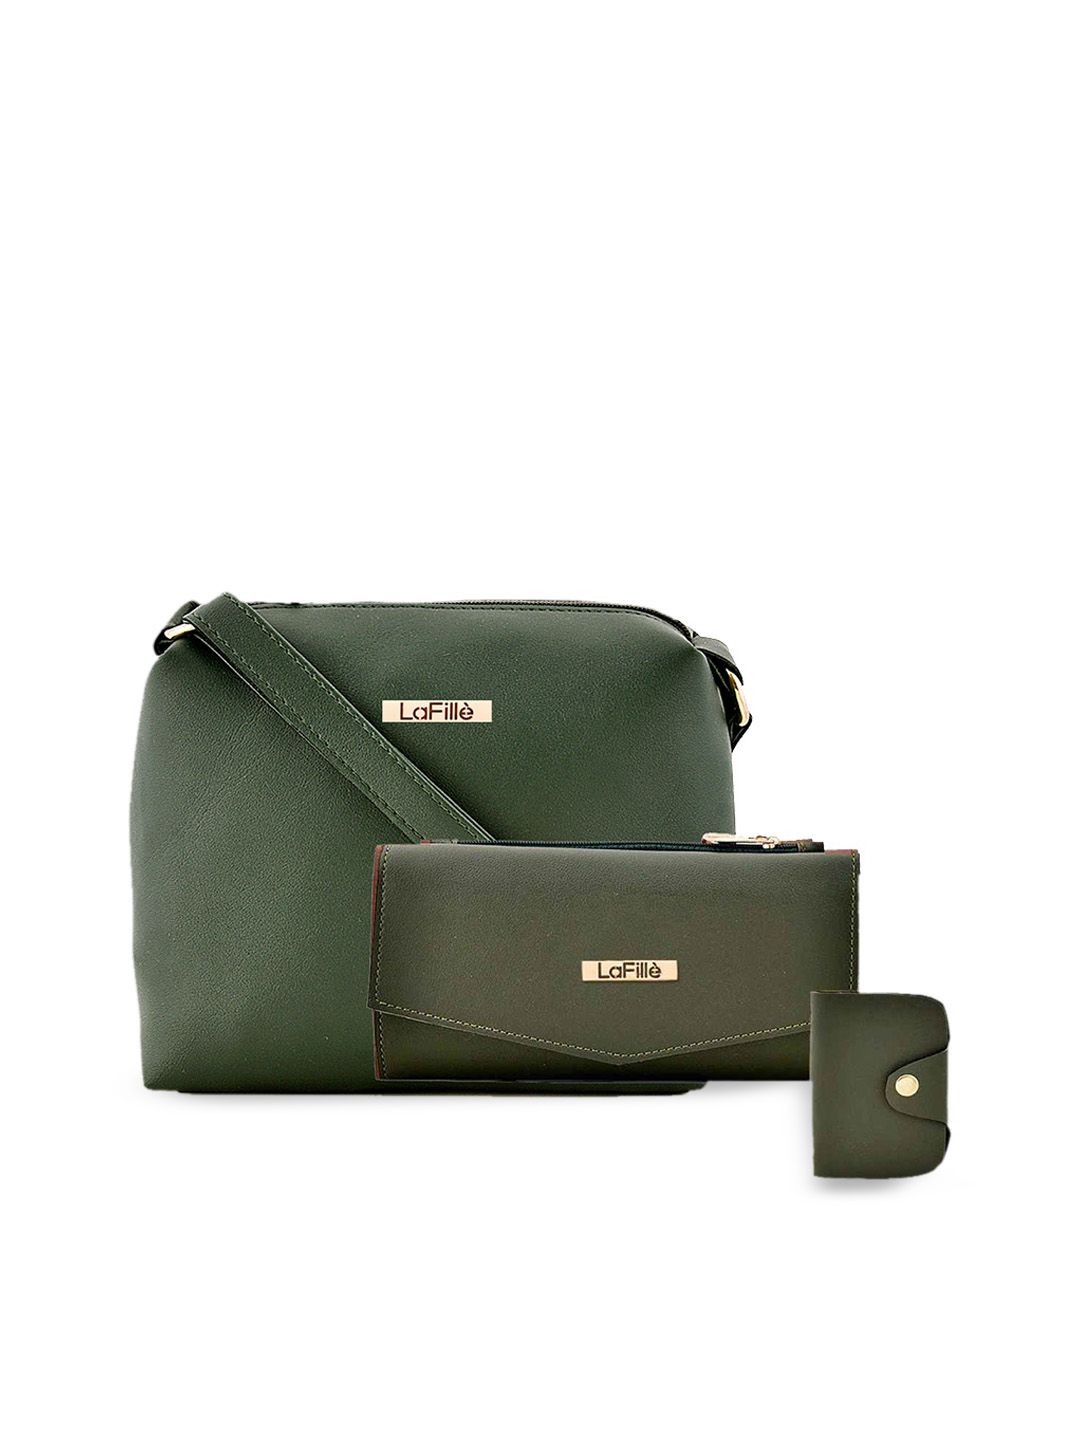 LaFille Green Structured Sling Bag With Wallet & Card Holder Price in India